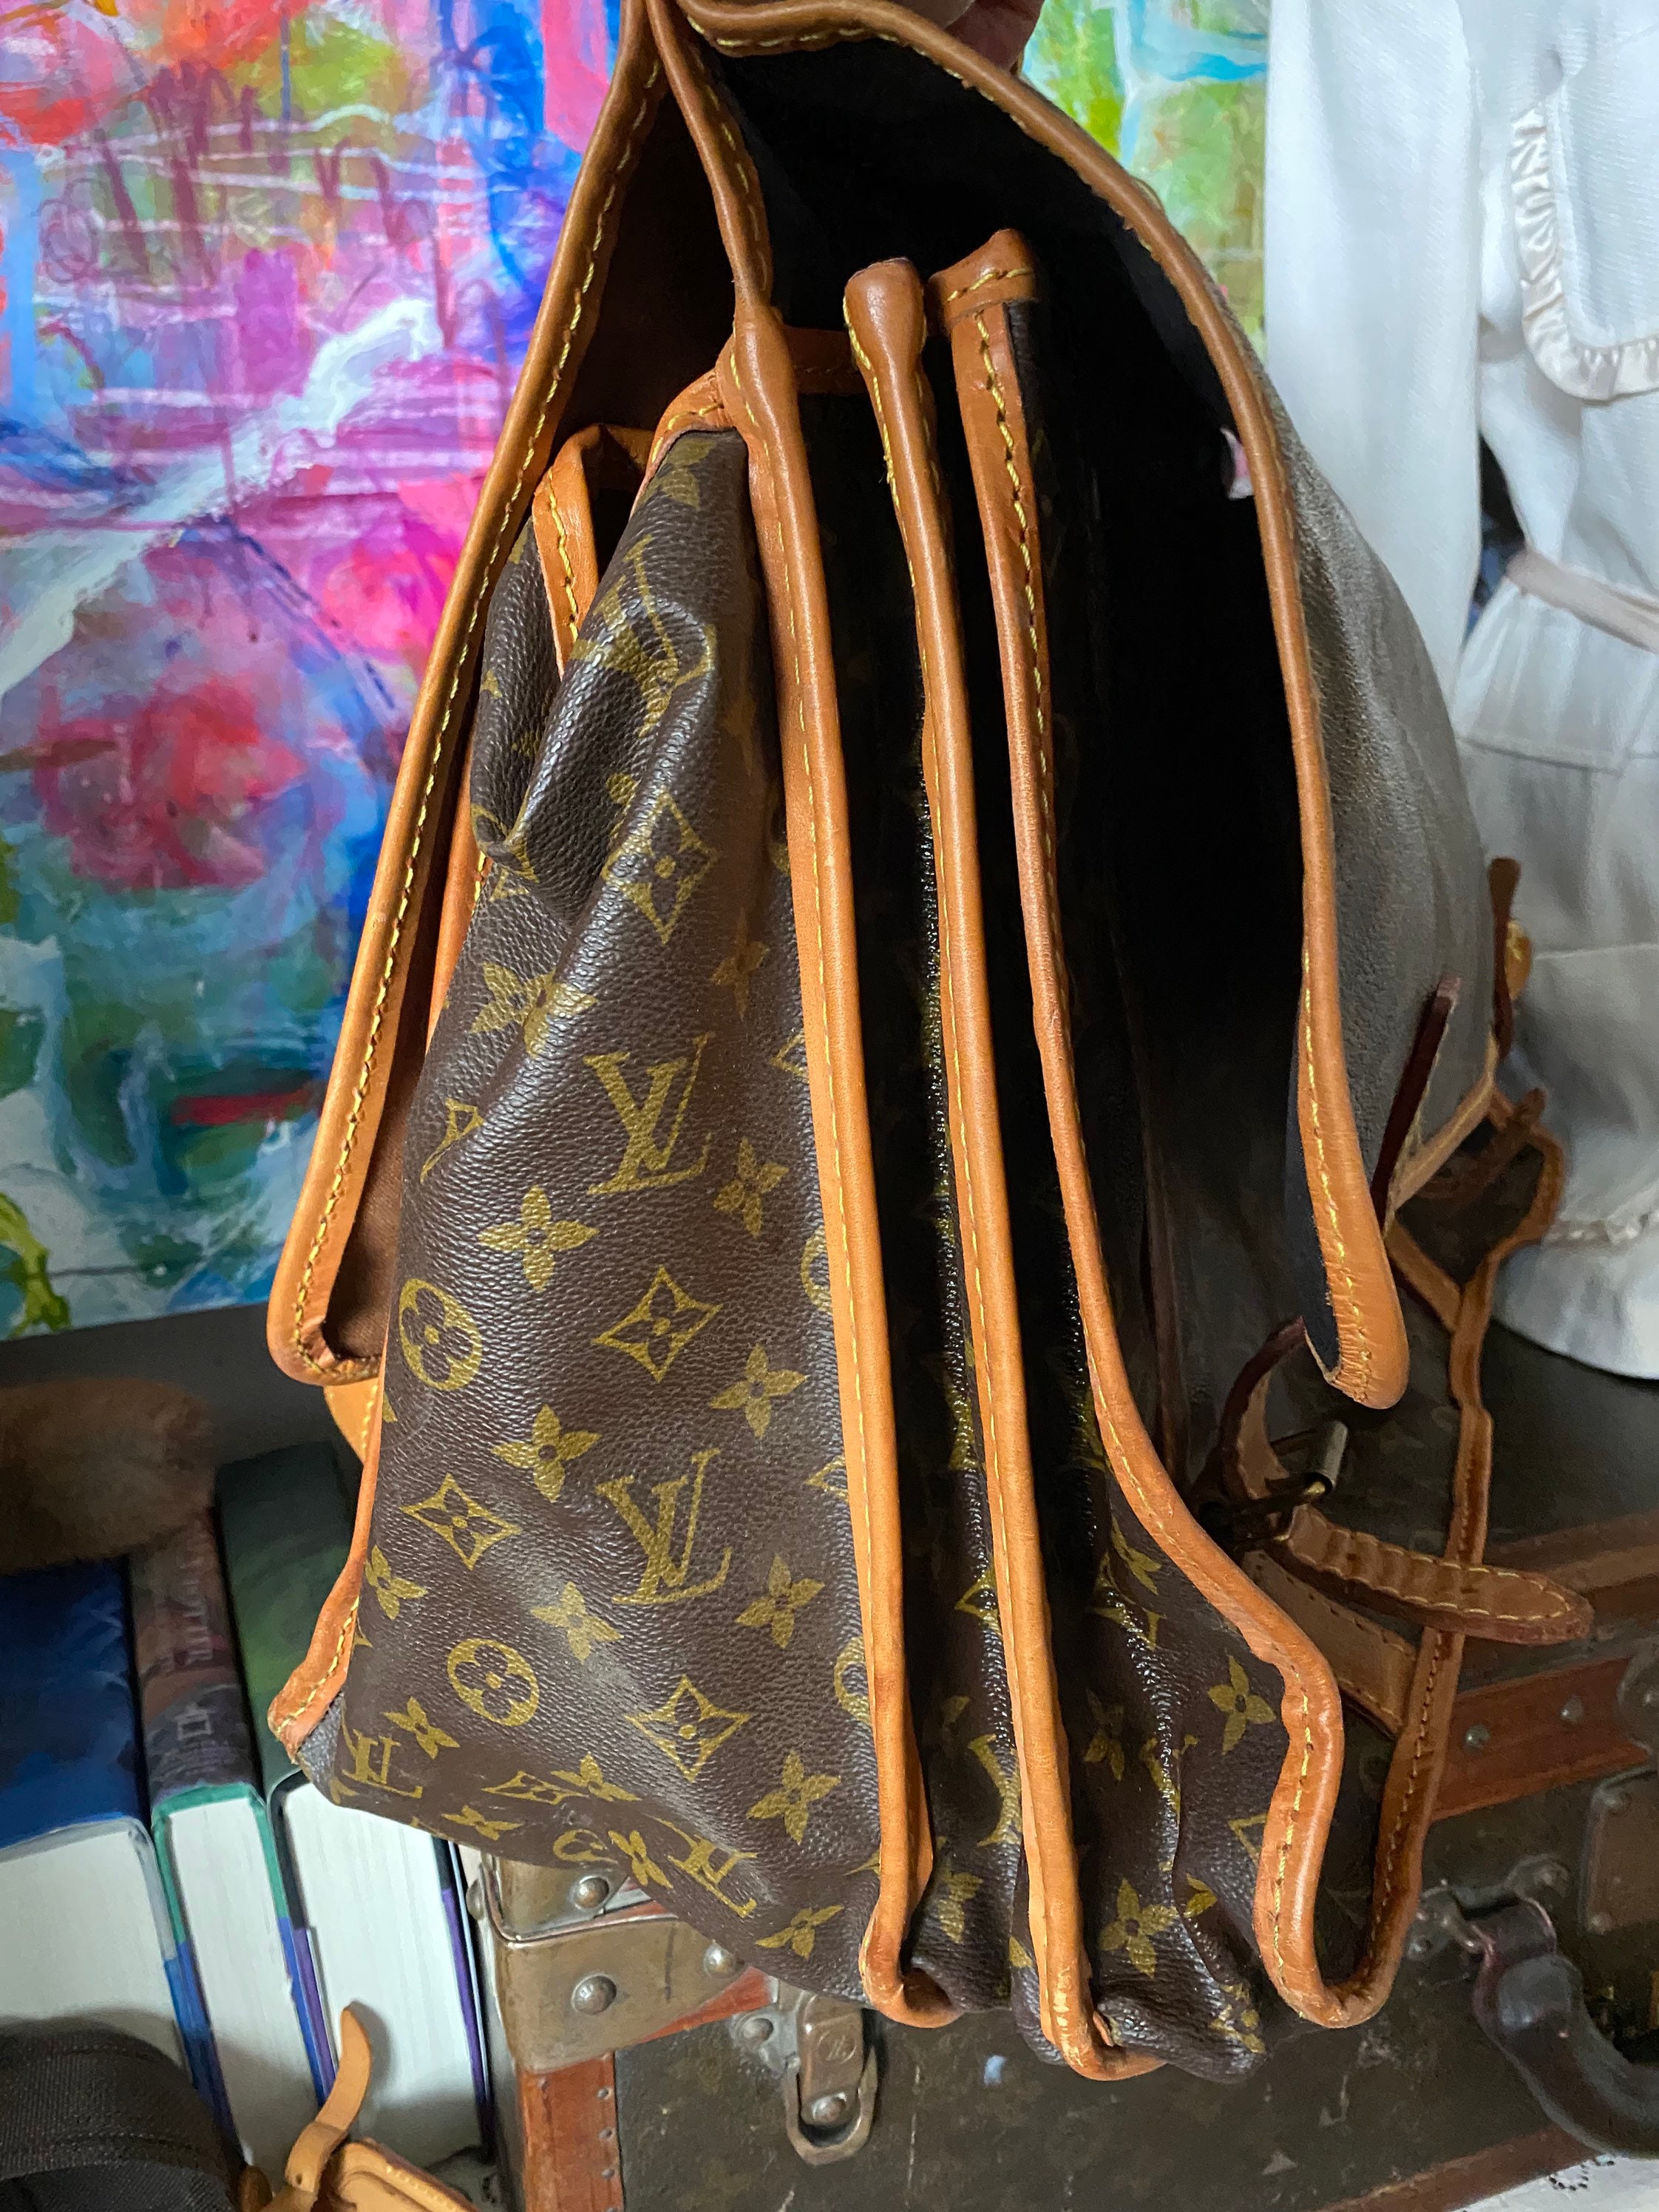 SALE Rare Vintage Auth LOUIS VUITTON Sac Chasse Tote Luggage 